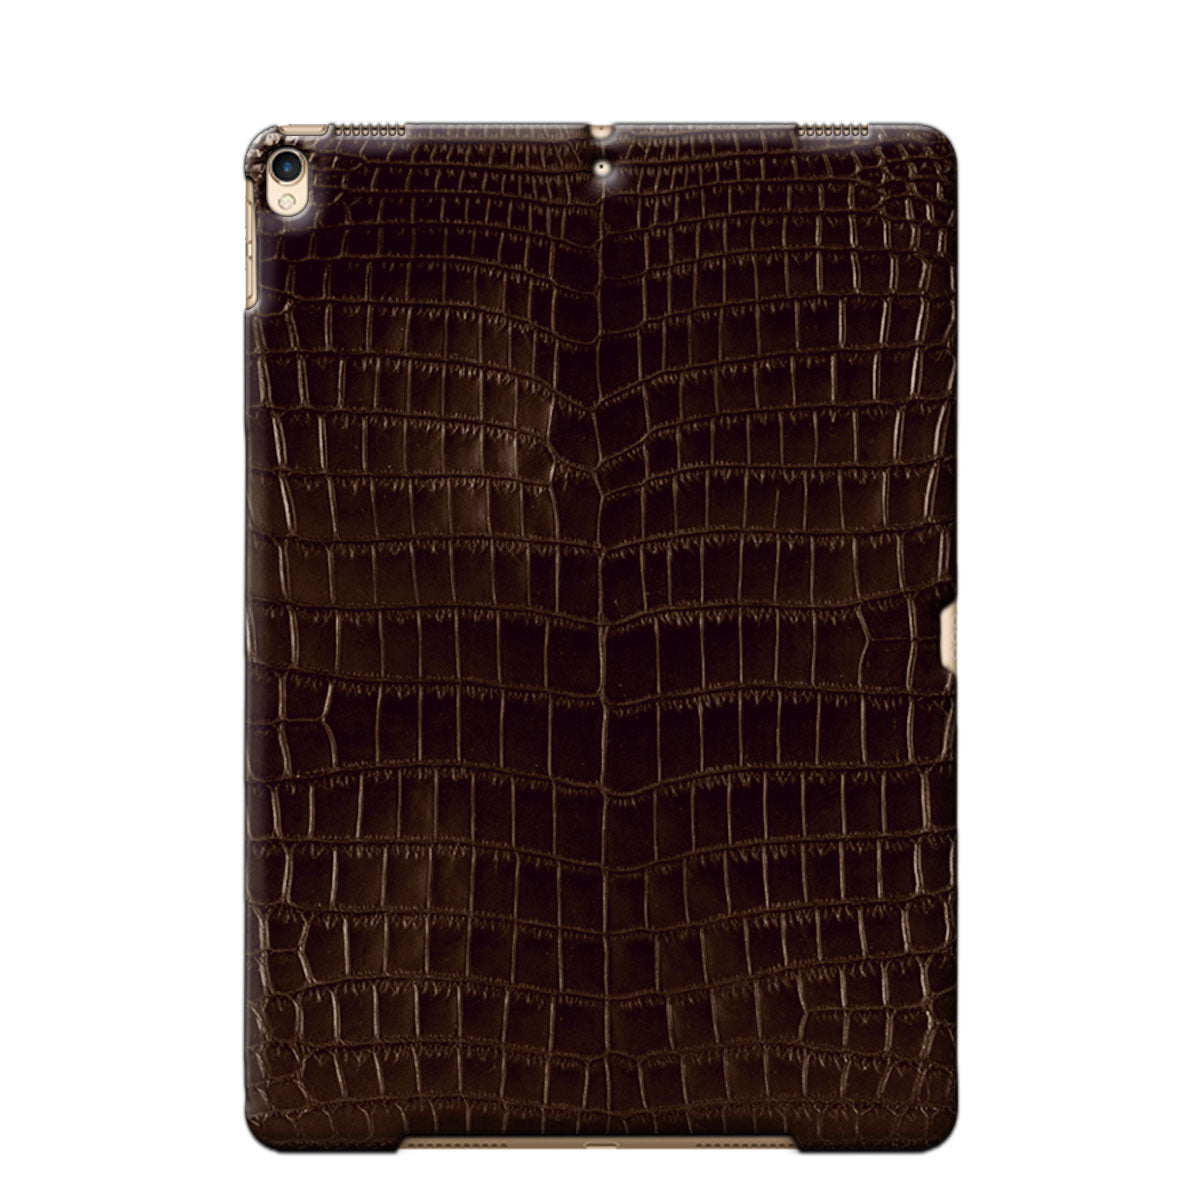 Leather iPad case / cover - iPad Pro 10.5 & 11 inches ( 2nd , 3rd & 4th generation ) - Genuine alligator